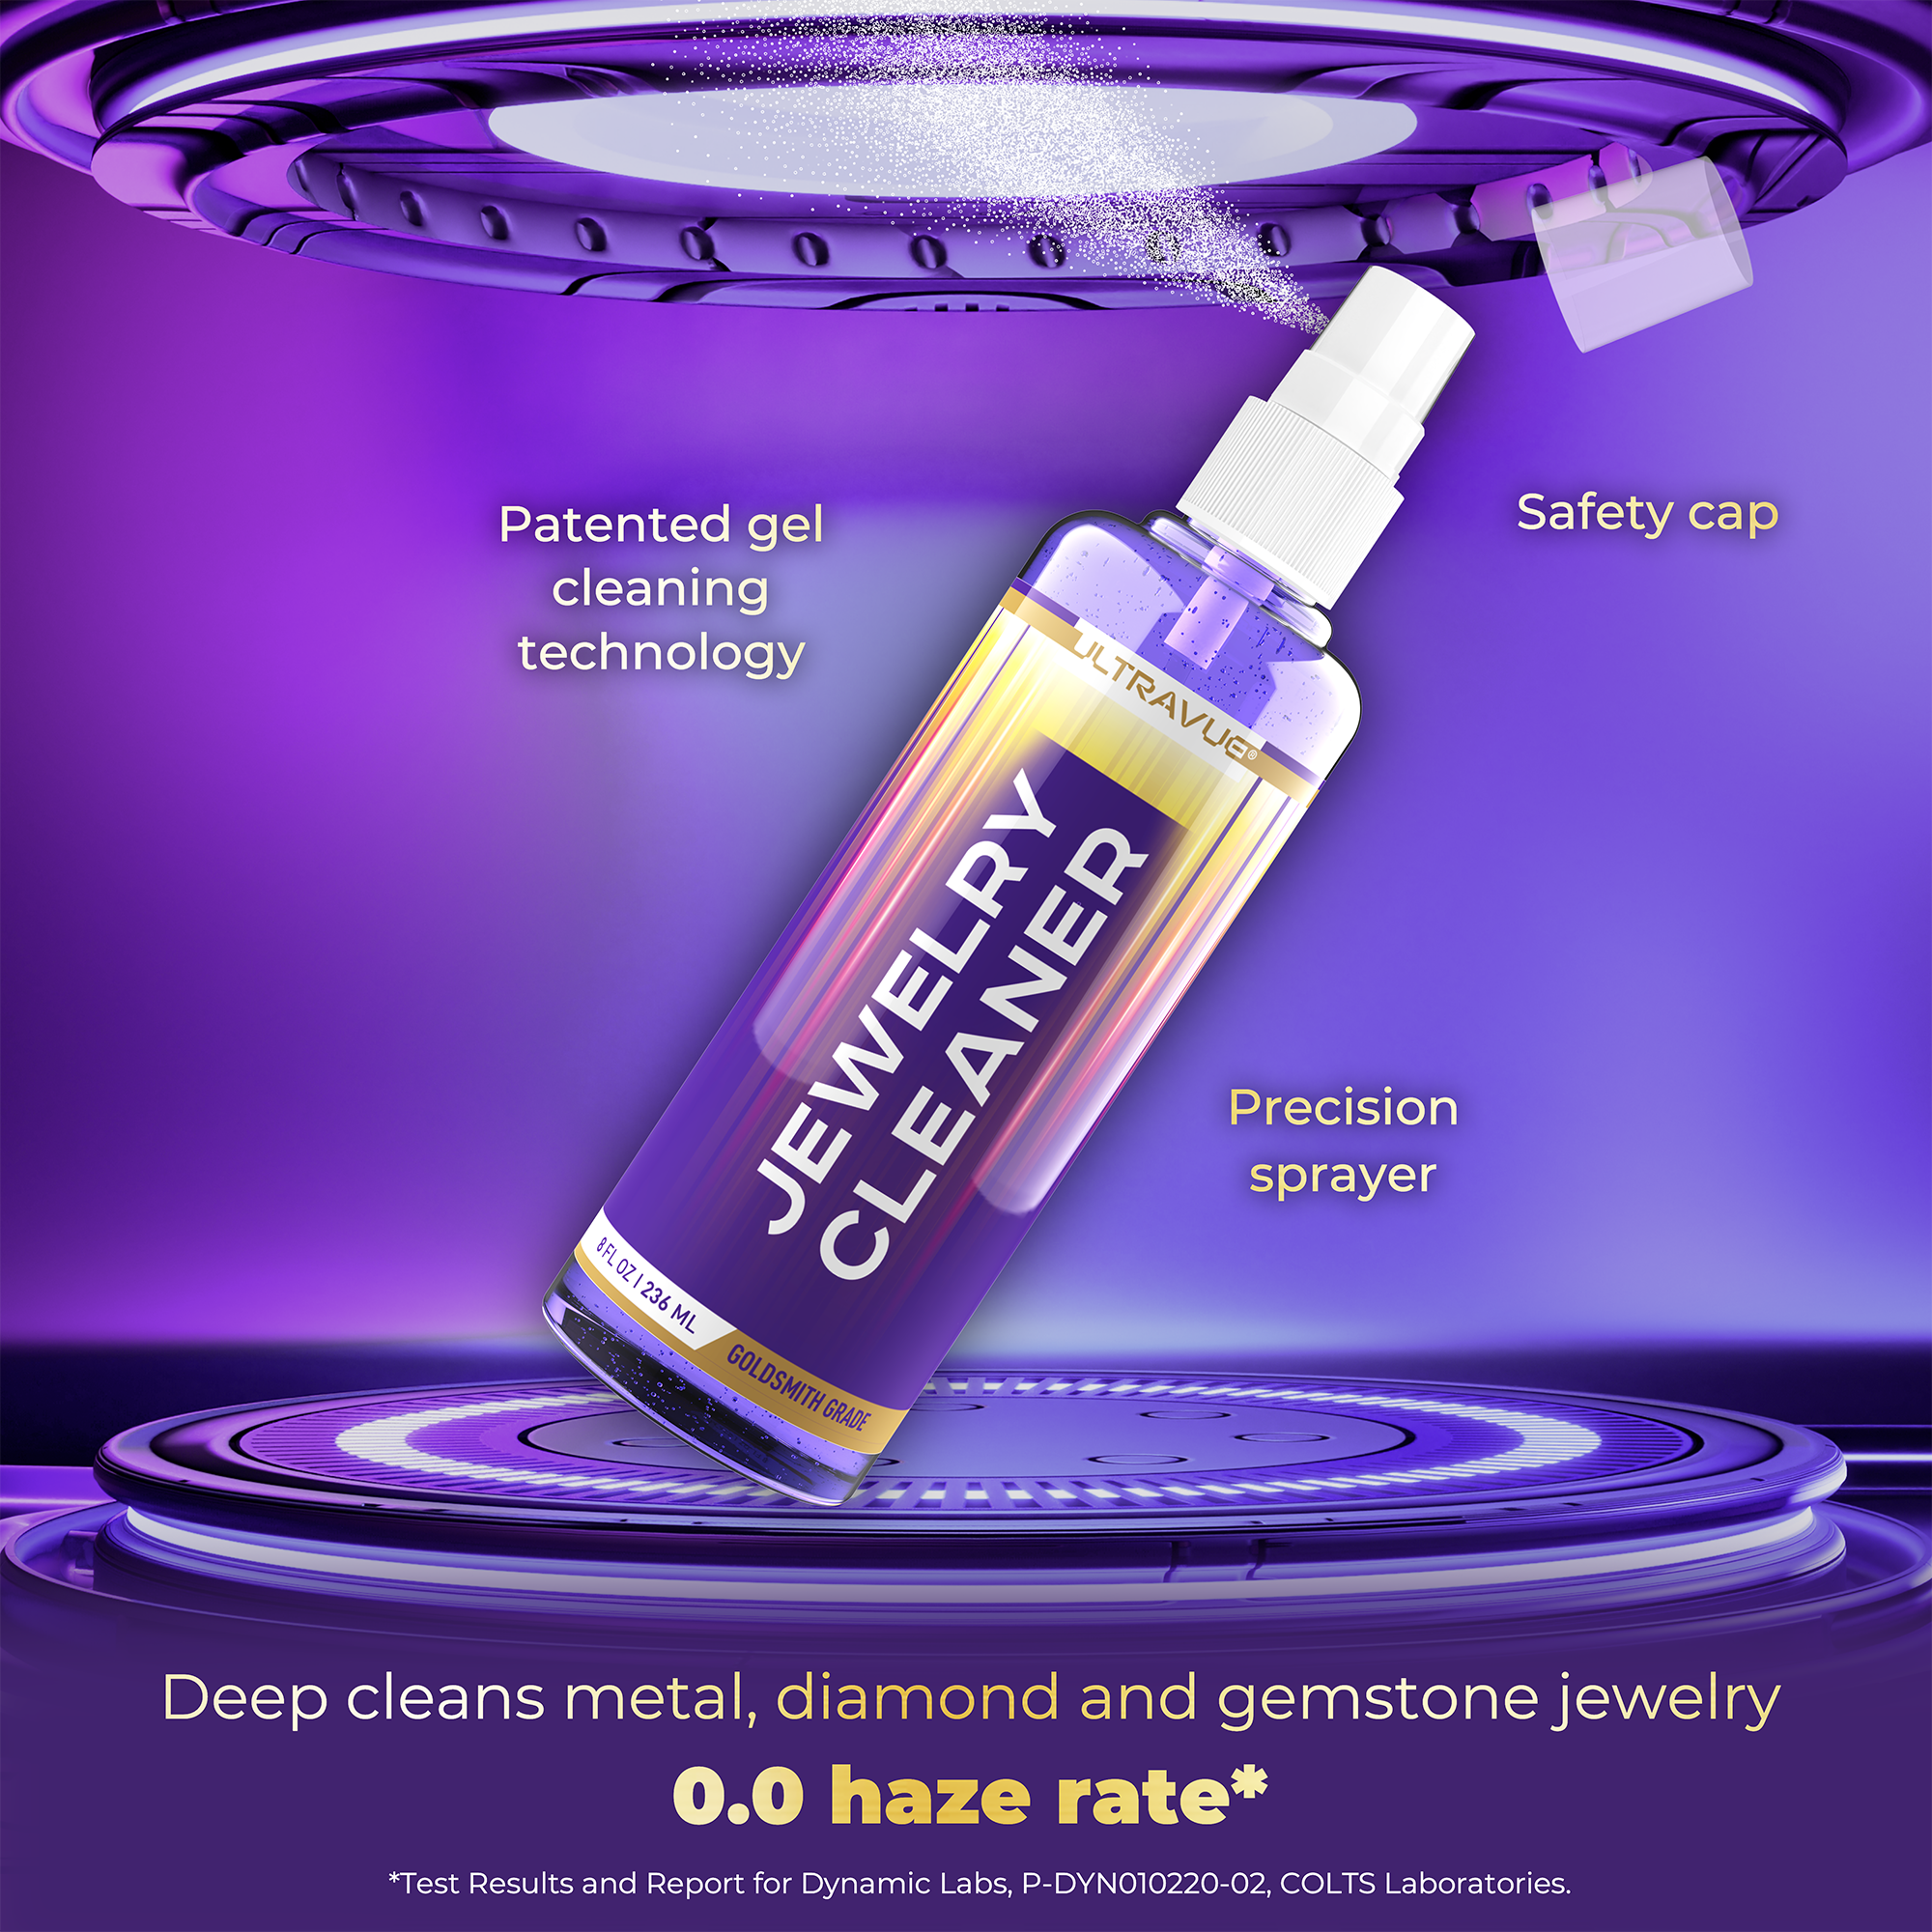 ULTRAVUE Jewelry Cleaner Set - Cleans All Jewels, Diamonds, Gold, Silver Earring Cleaner & Gem Cleaner - 1 x 2oz and 1 x 8oz Jewelry Cleaner Gel Spray, 3 x Microfiber Cloth, 2 x Horsehair Brush.